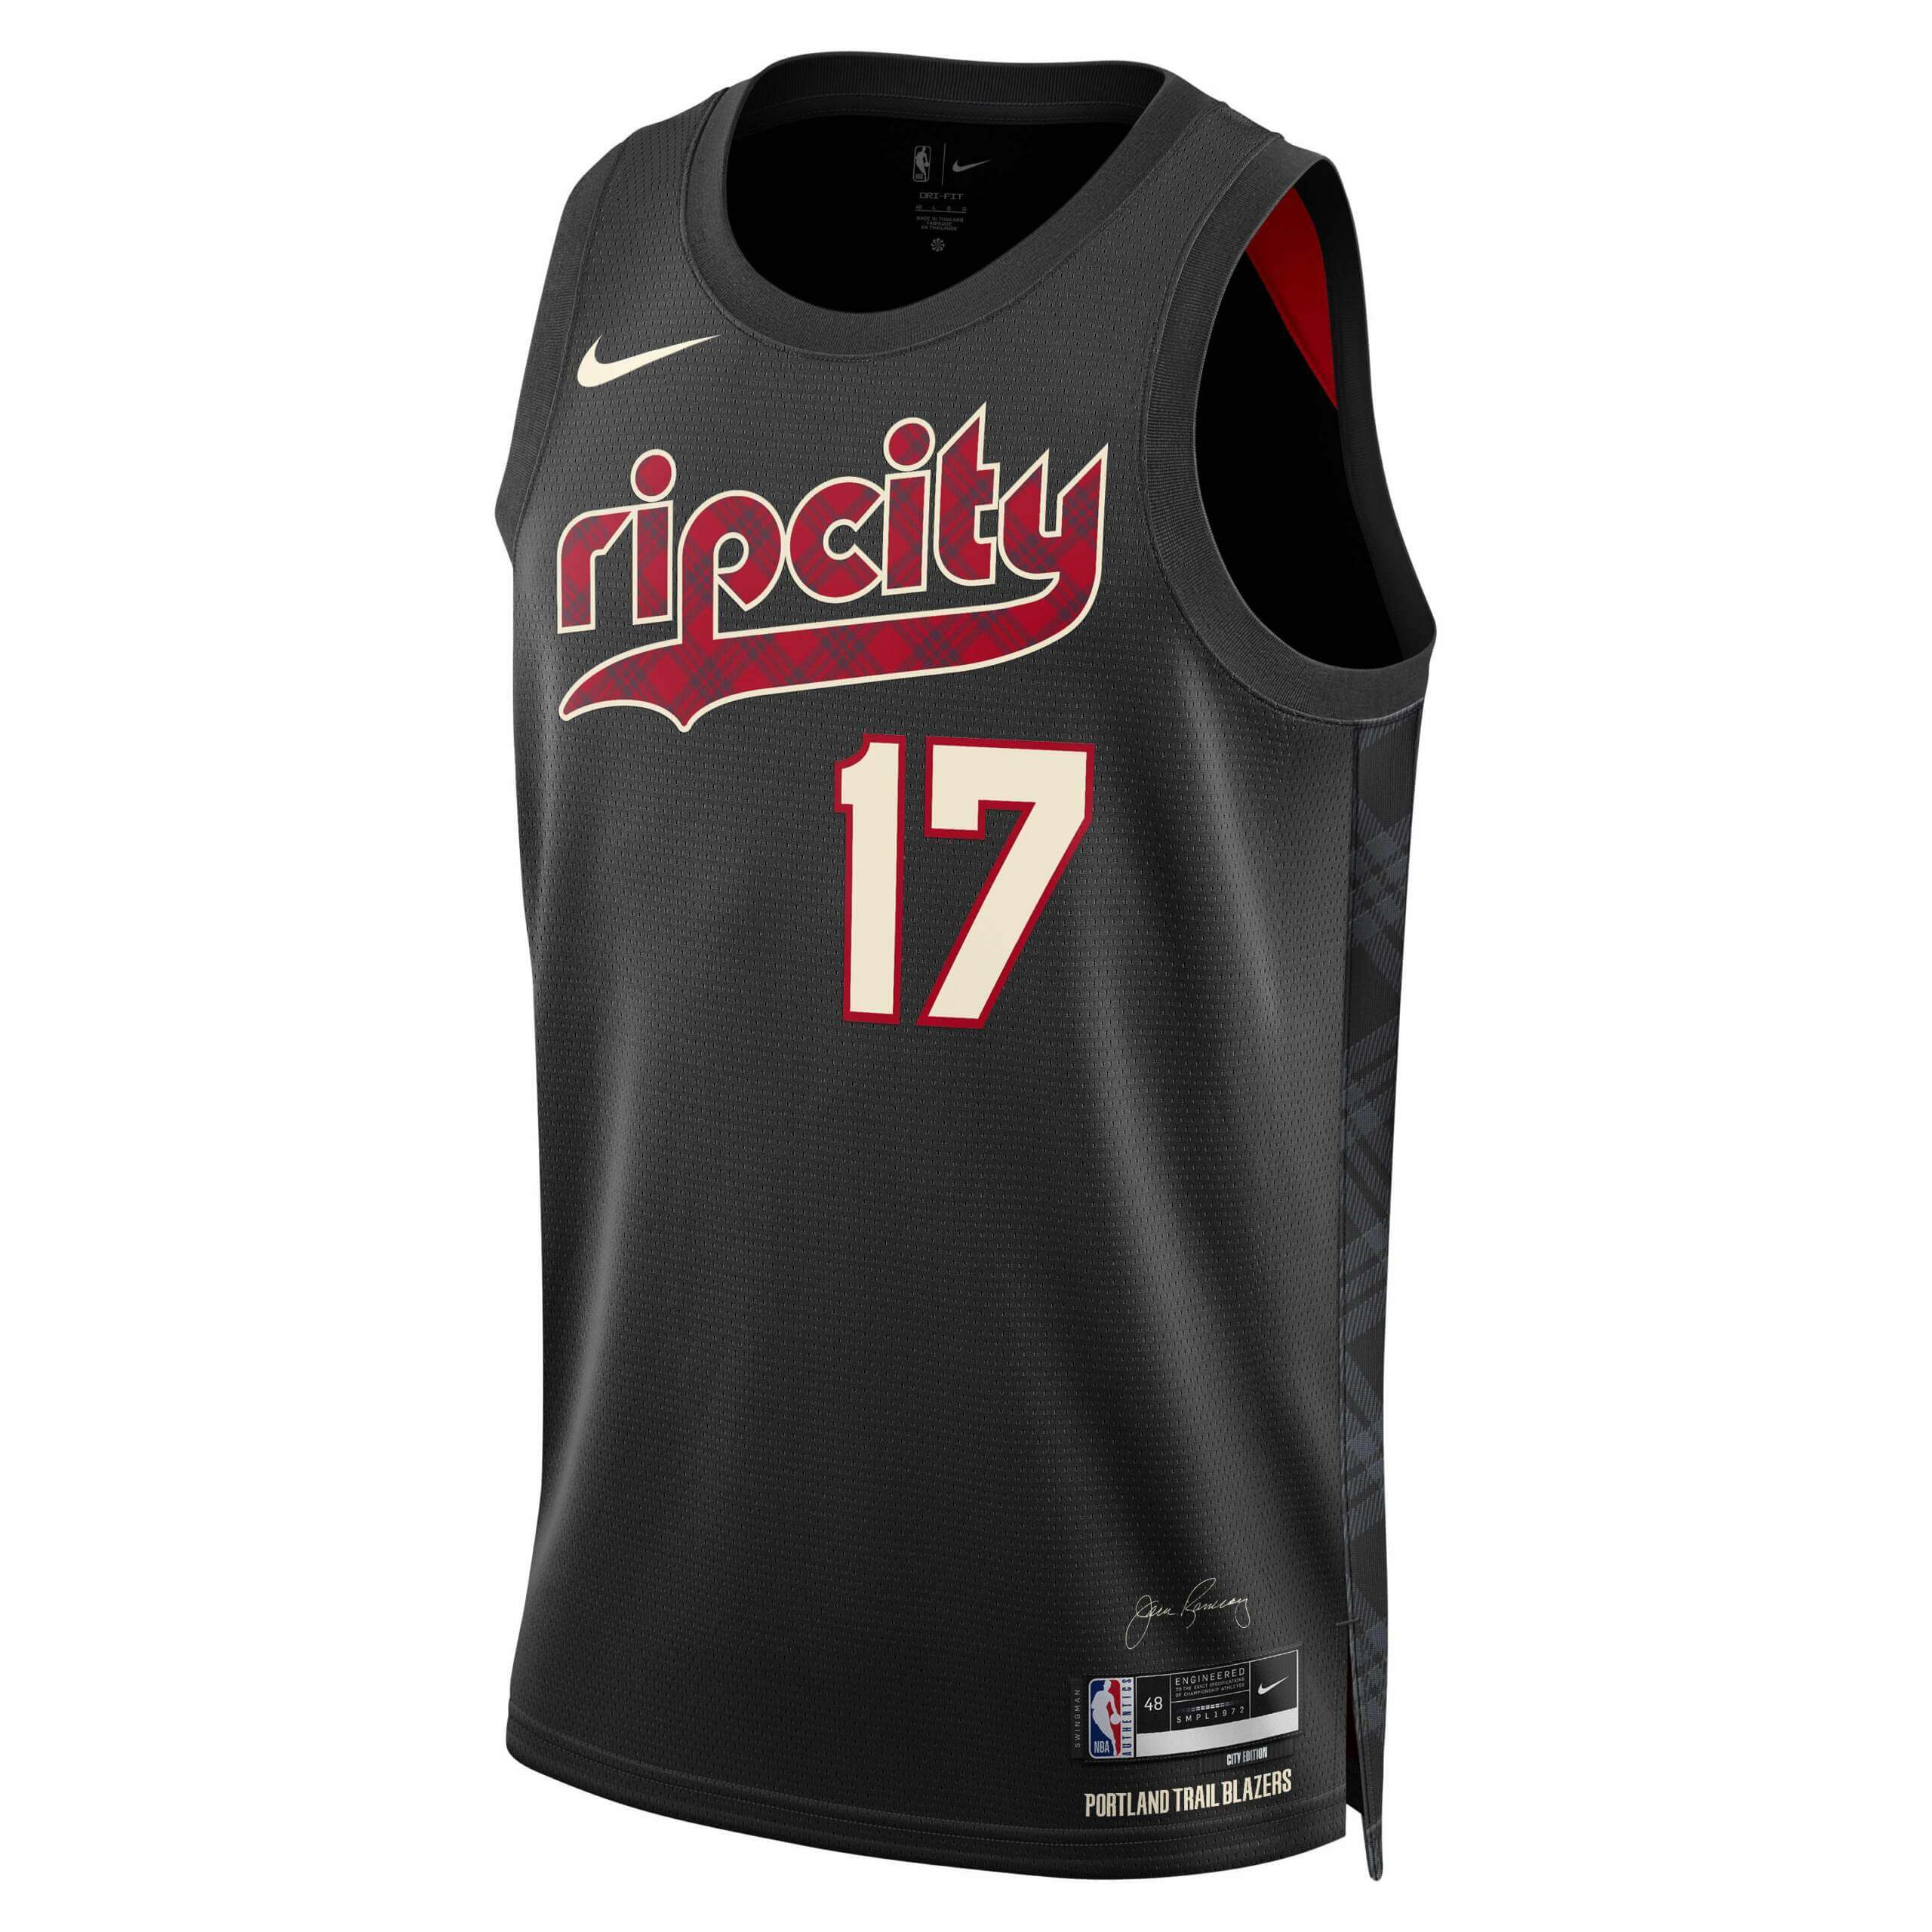 All 30 NBA City Jerseys (and Some Shorts) Have Now Leaked